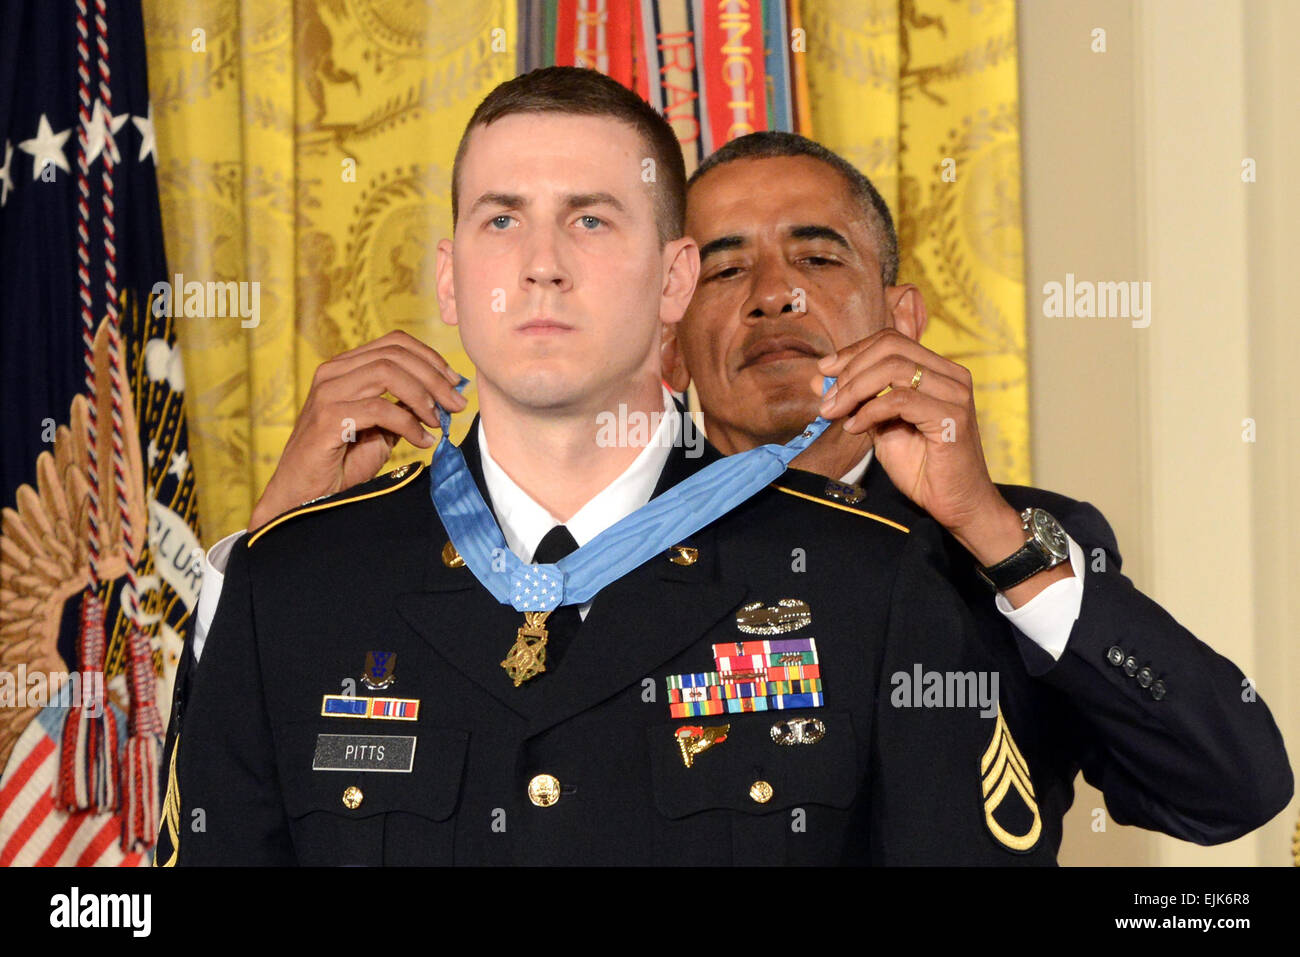 President Barack Obama awards the Medal of Honor to former U.S. Army Staff Sgt. Ryan M. Pitts, the White House, Washington, D.C., July 21, 2014. Pitts received the nation's highest military honor for his actions in 2008 in Wanat, Afghanistan, with 2nd Platoon, Chosen Company, 2nd Battalion Airborne, 503rd Infantry Regiment, 173rd Airborne Brigade.   Army News Service photo by Lisa Ferdinando  /medalofhonor/pitts/profile/index.html  /medalofhonor/pitts/profile/index.html Stock Photo